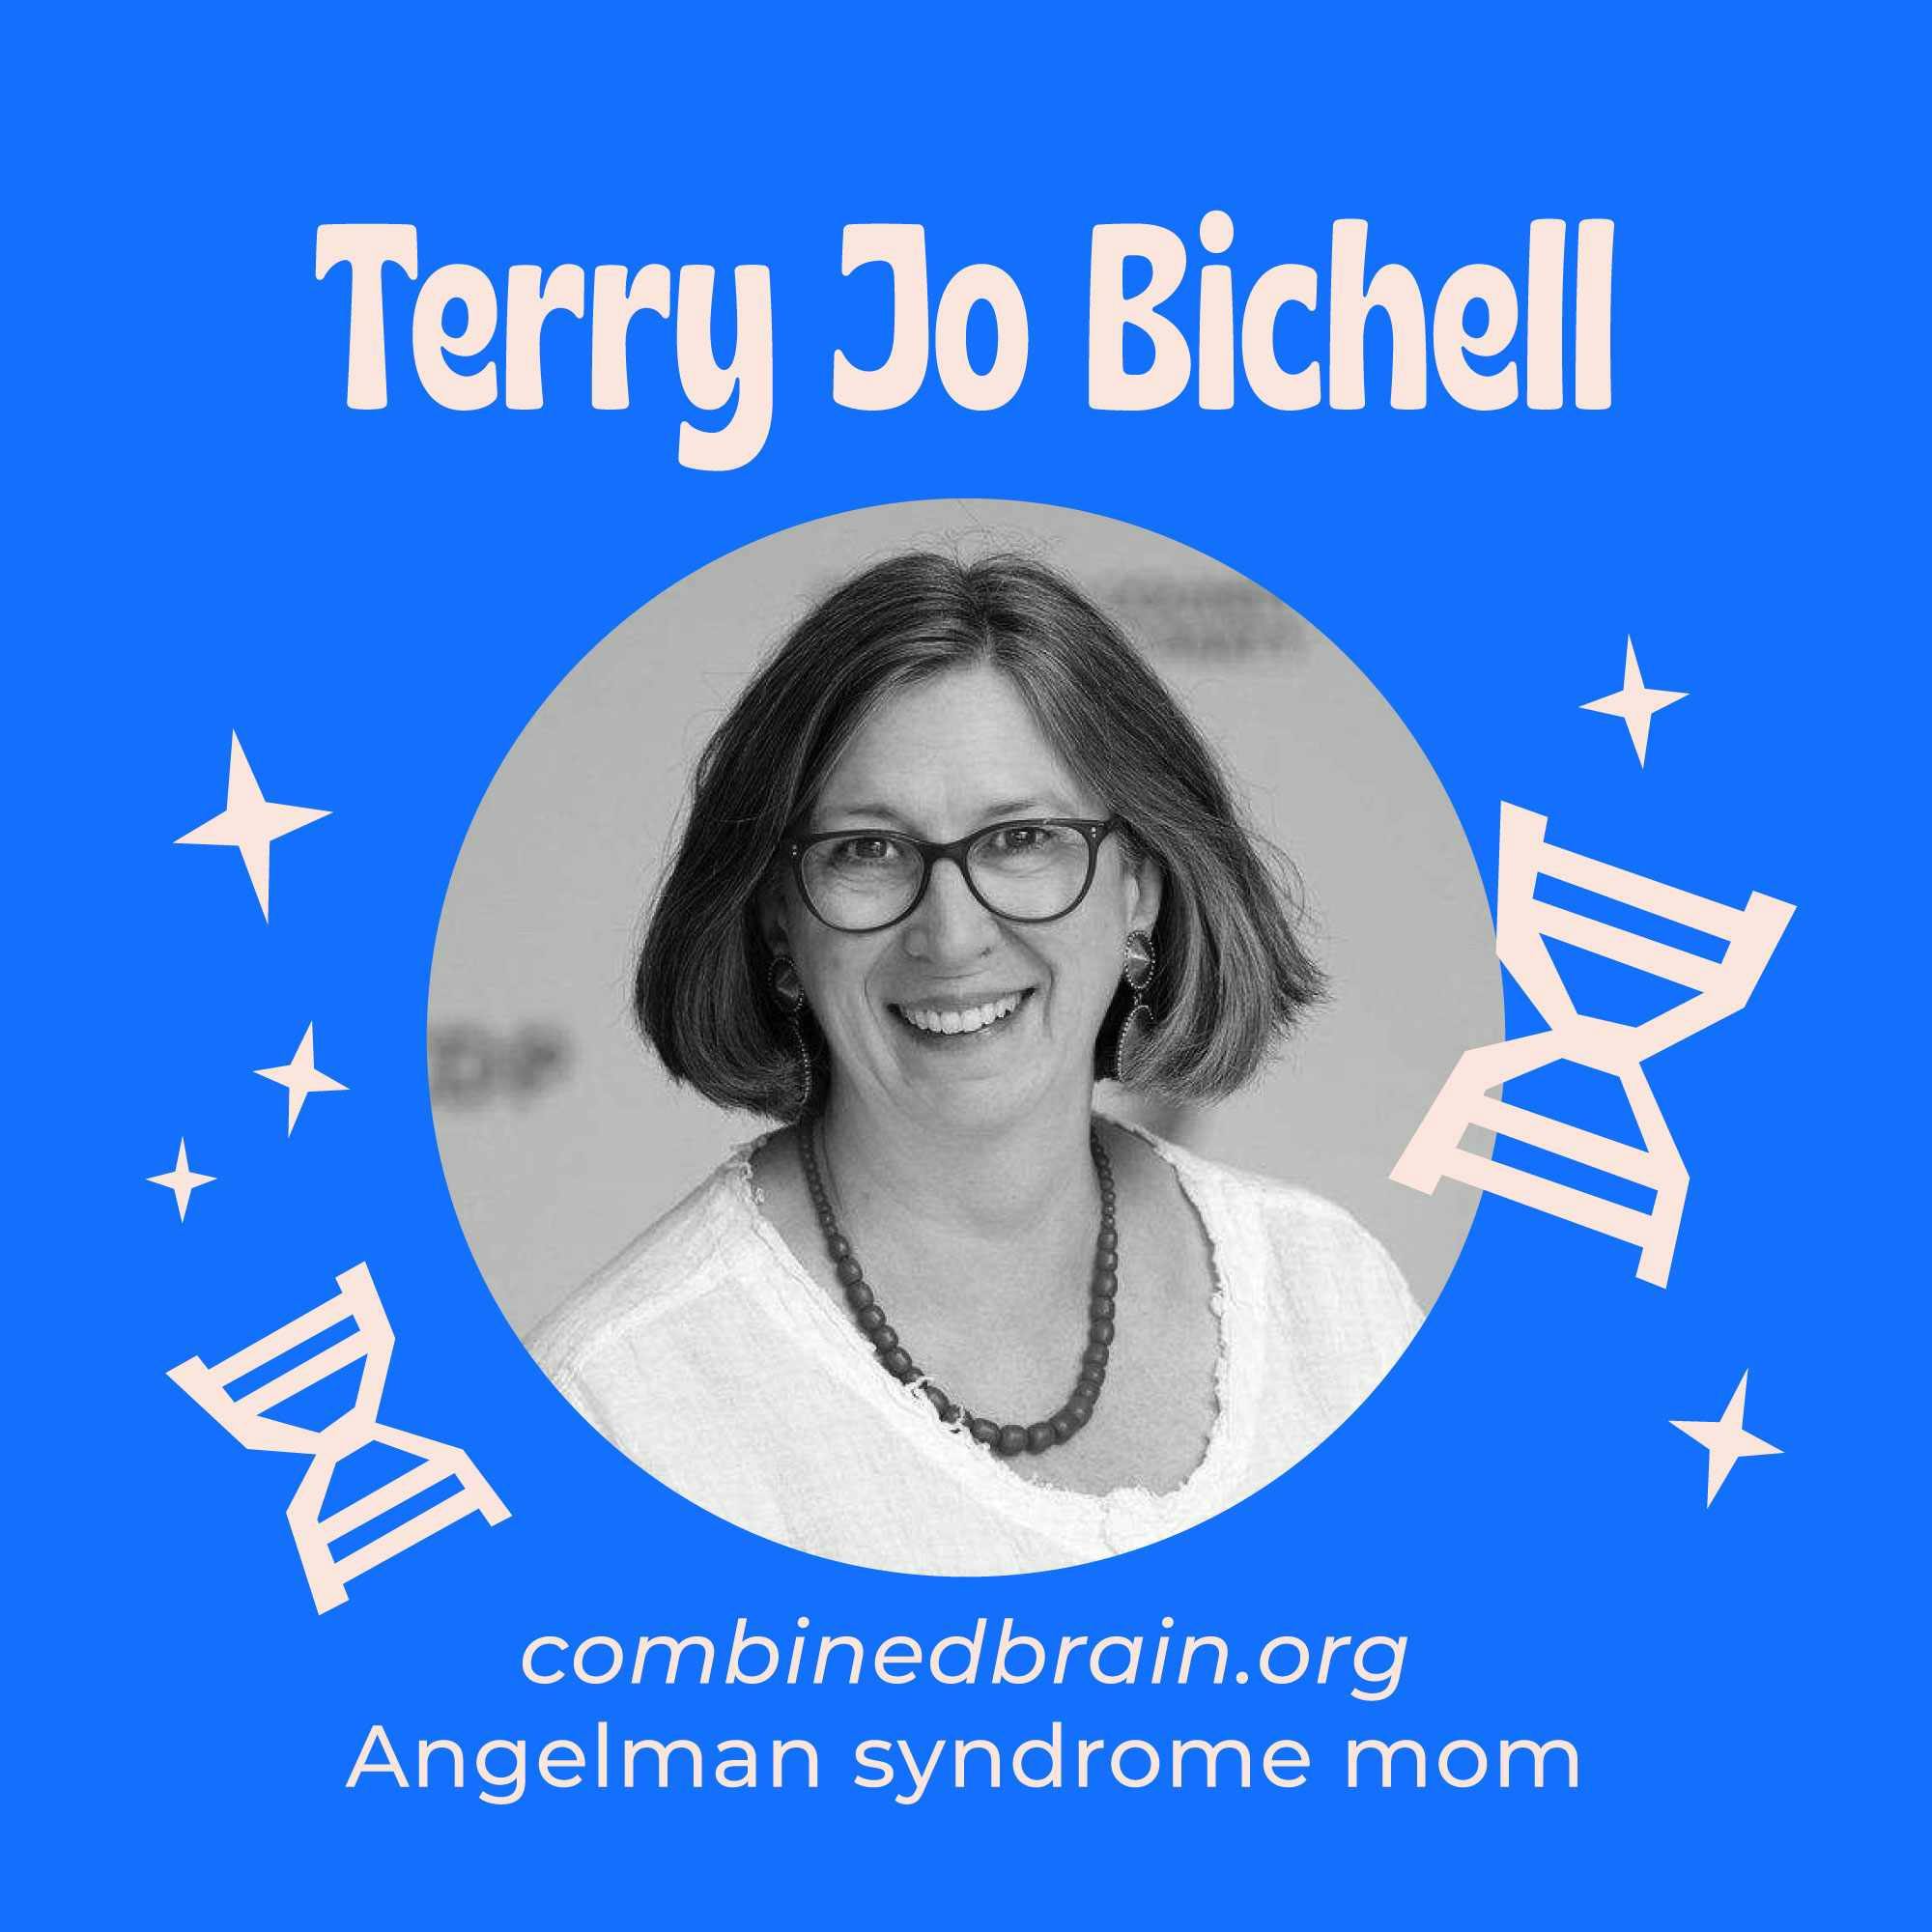 Uniting Science and Hope – COMBINEDBrain and it’s Quest to Transform Research and Treatment for Rare Genetic Neurodevelopmental Disorders with Terry Jo Bichell